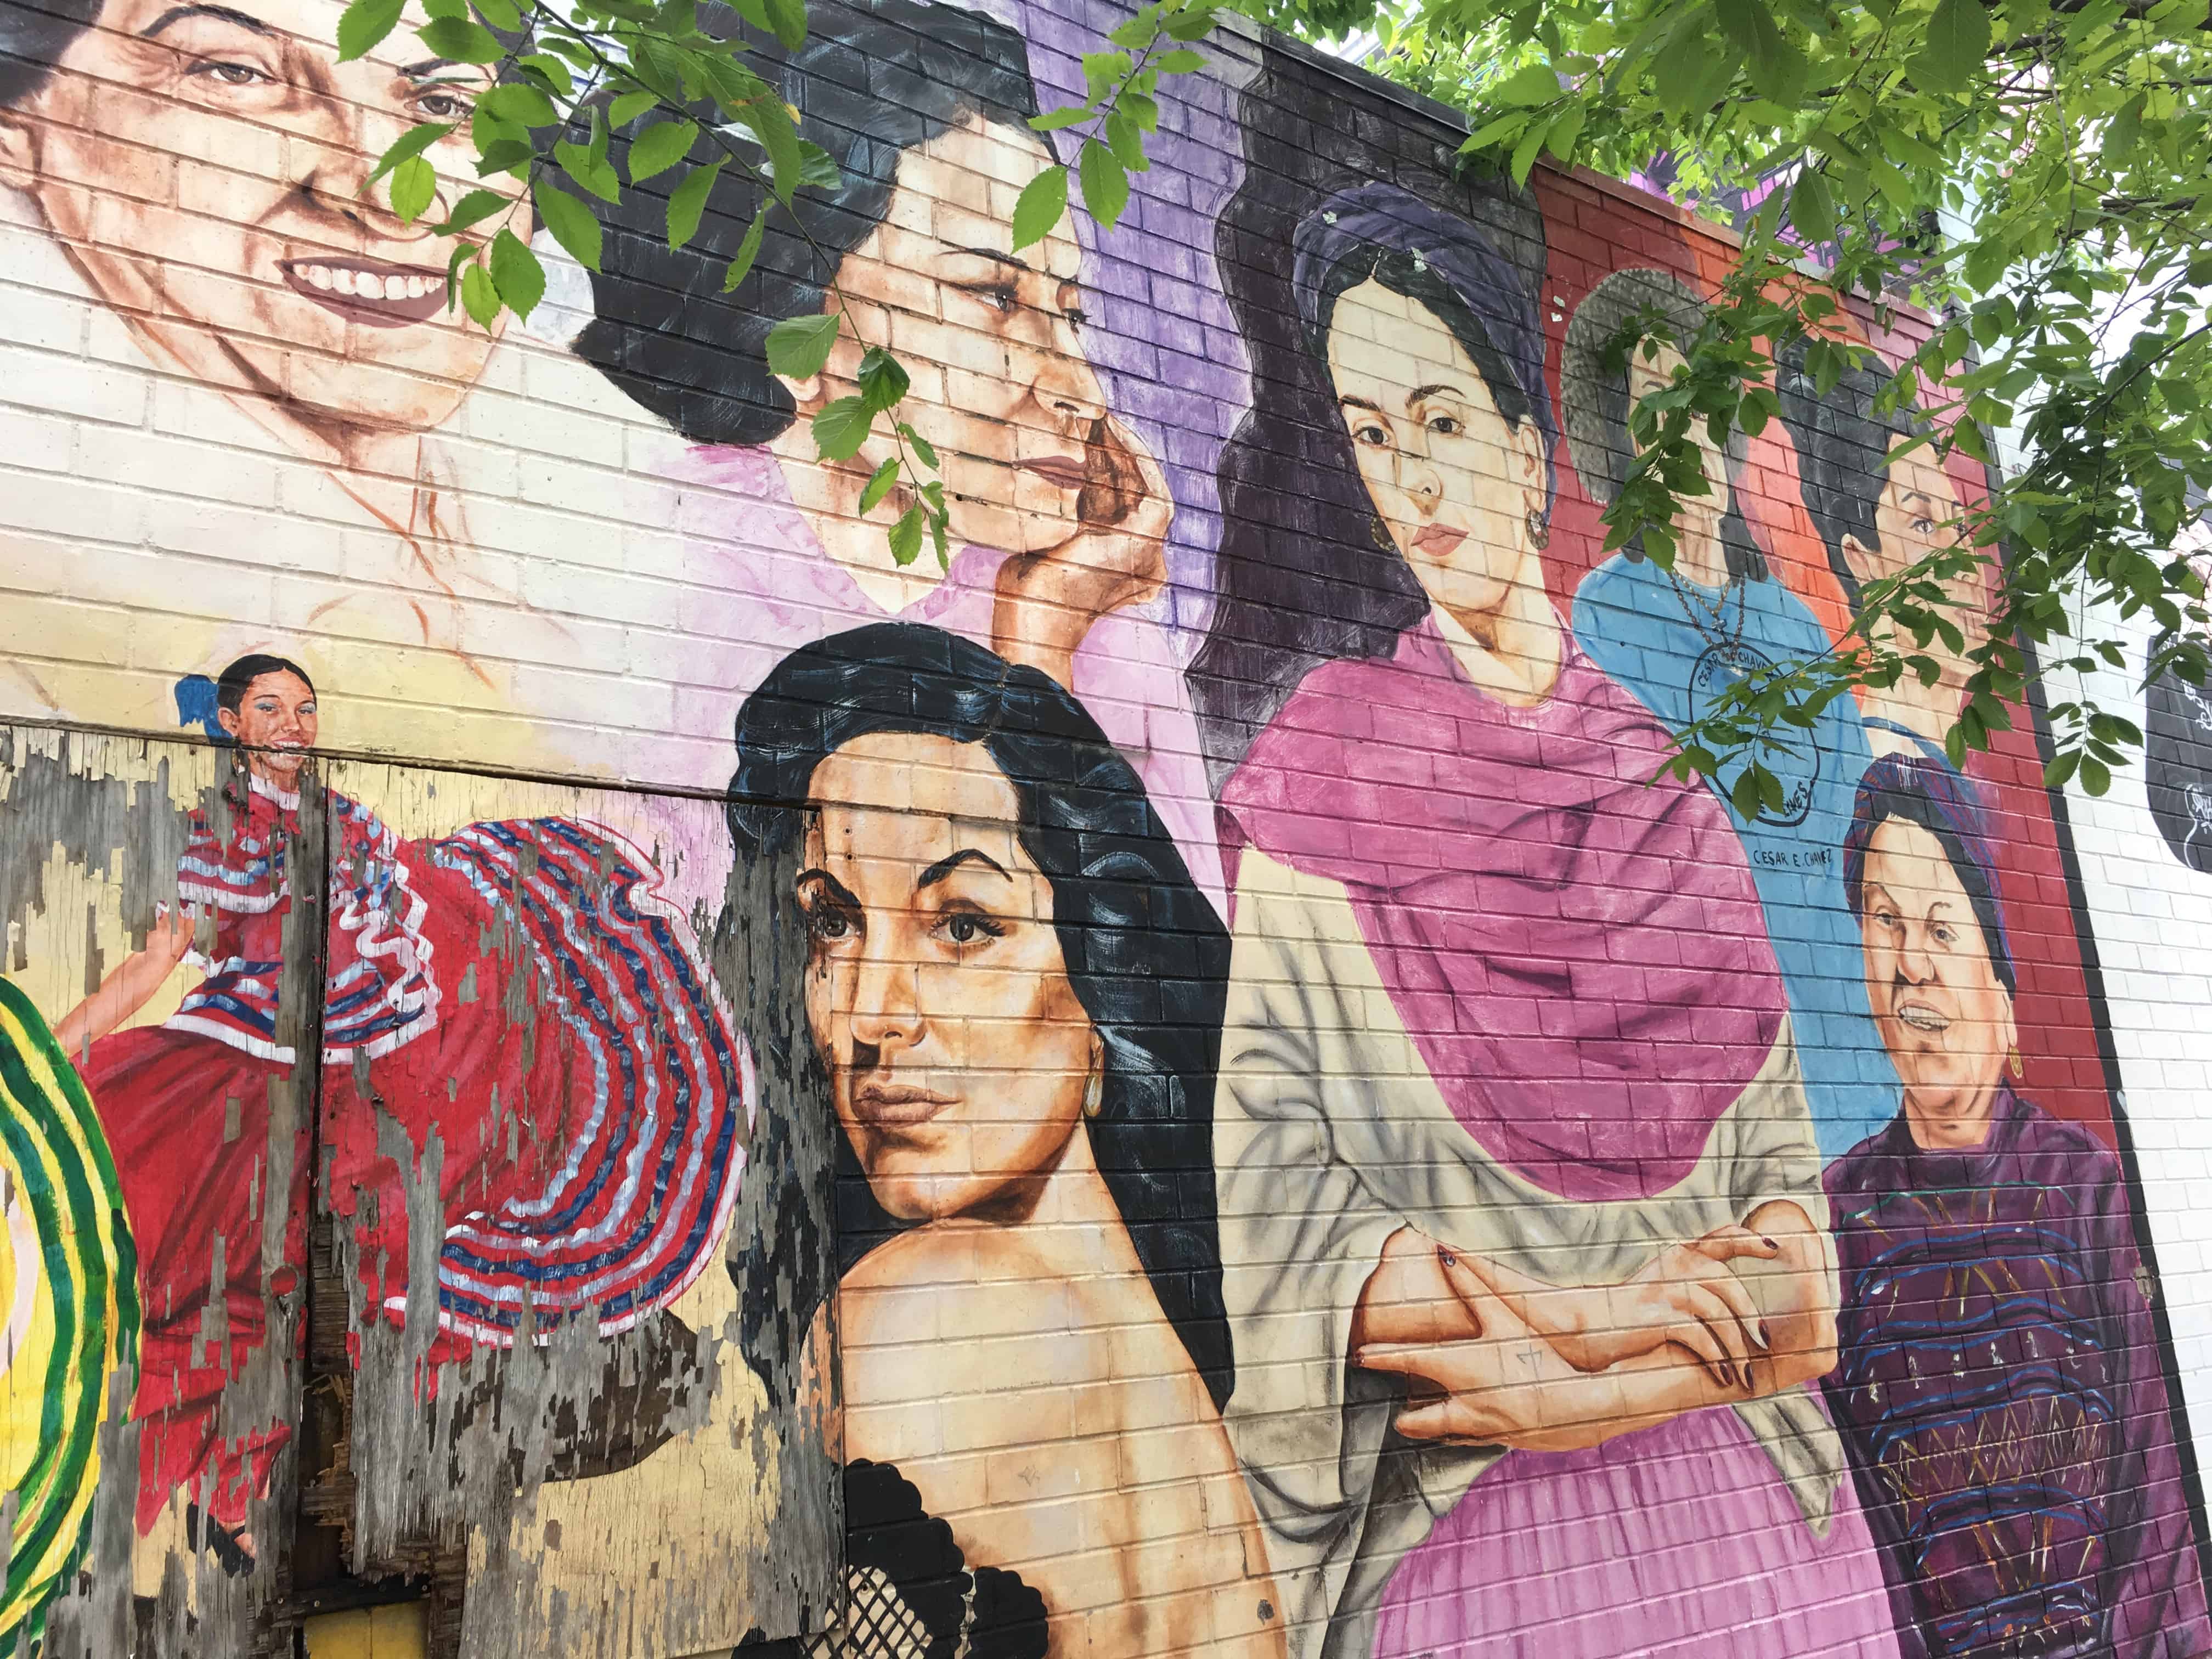 Mural of important Latina women at 18th and Wood